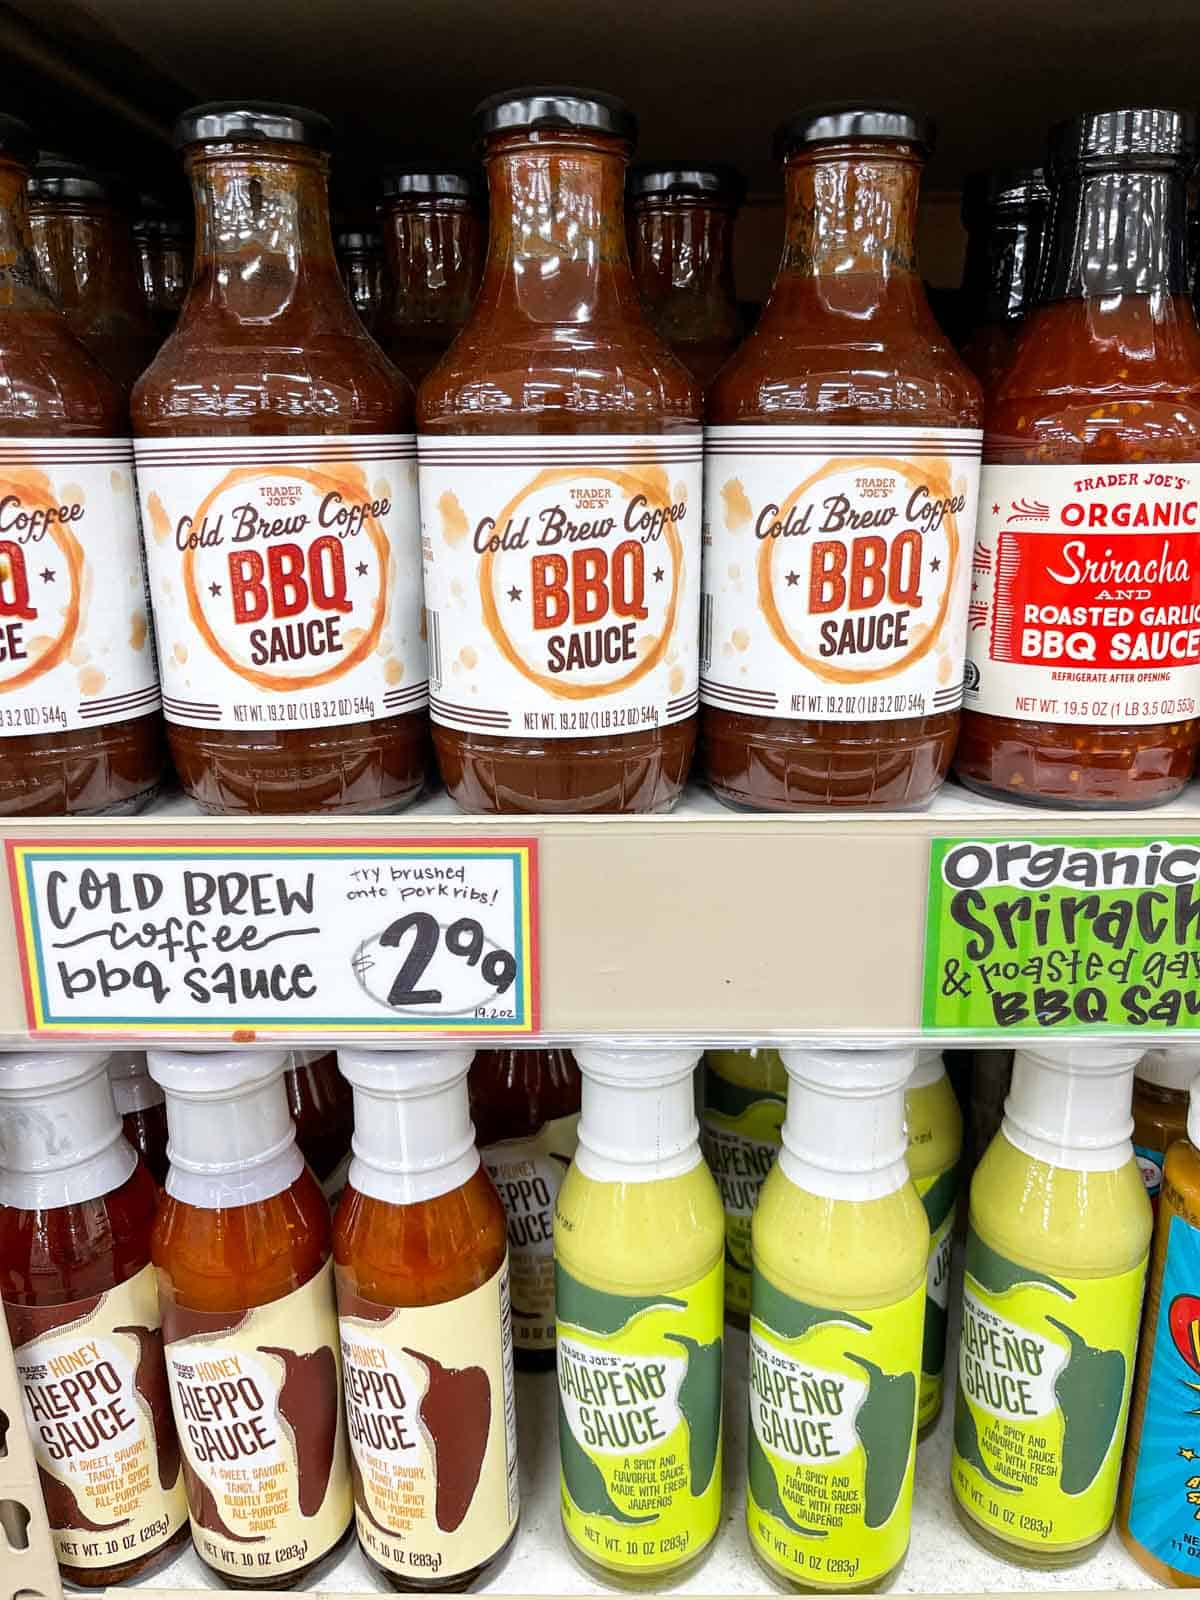 Two grocery store shelves with bottles of different types of sauces on them